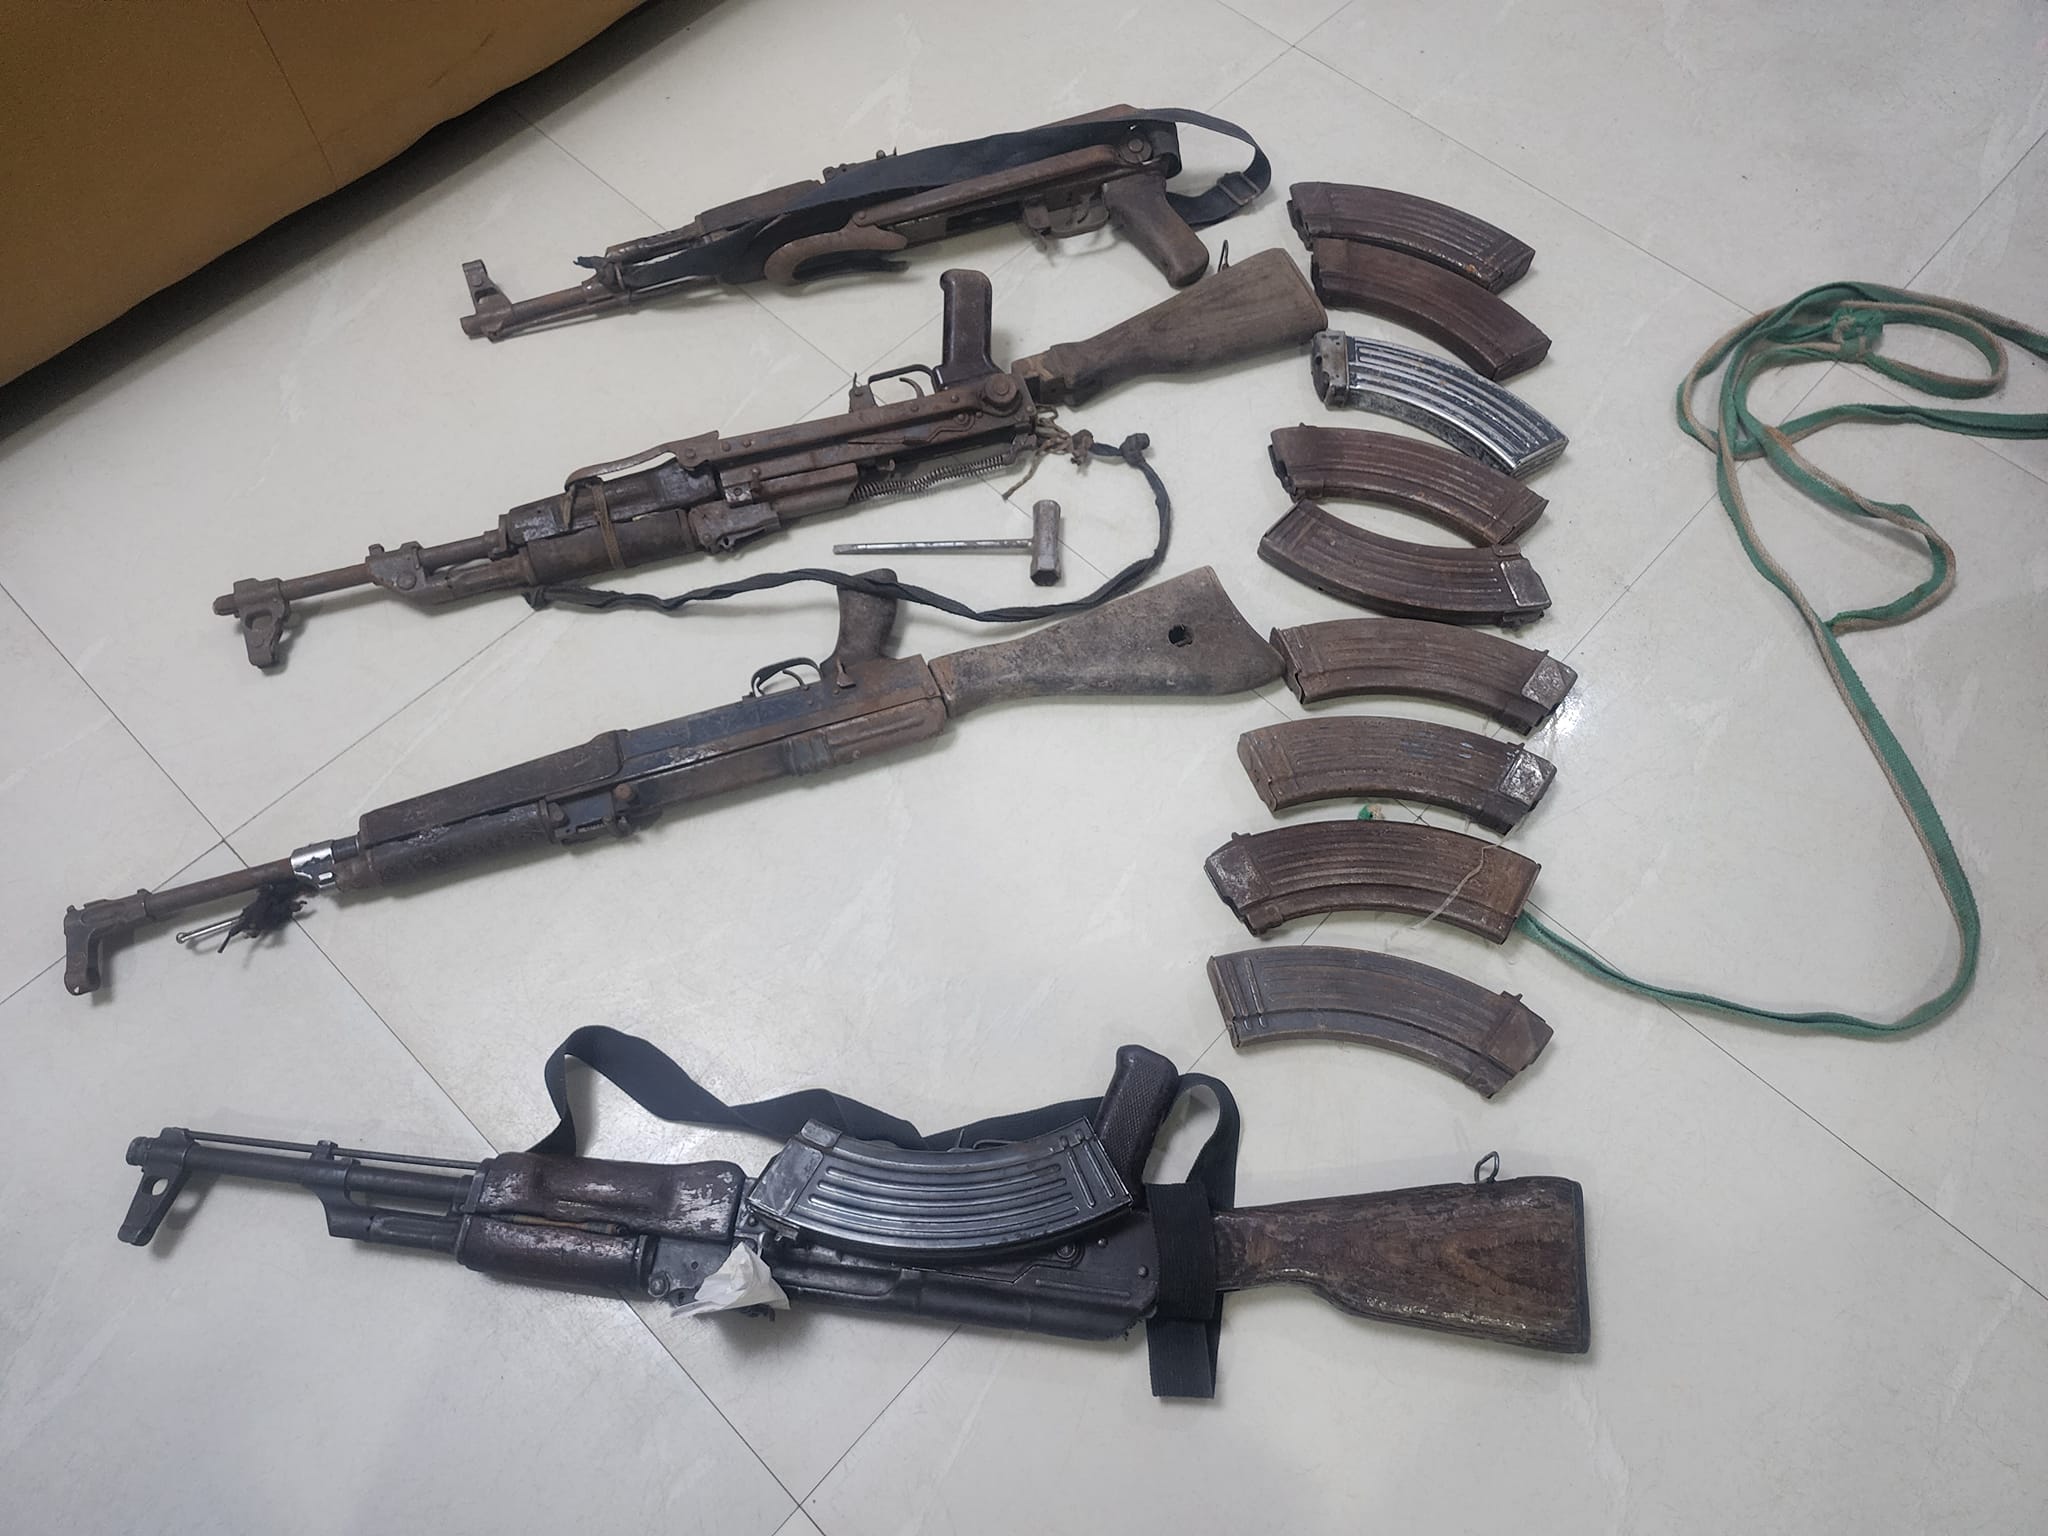 Police recover prohibited firearms hidden near river in Bauchi